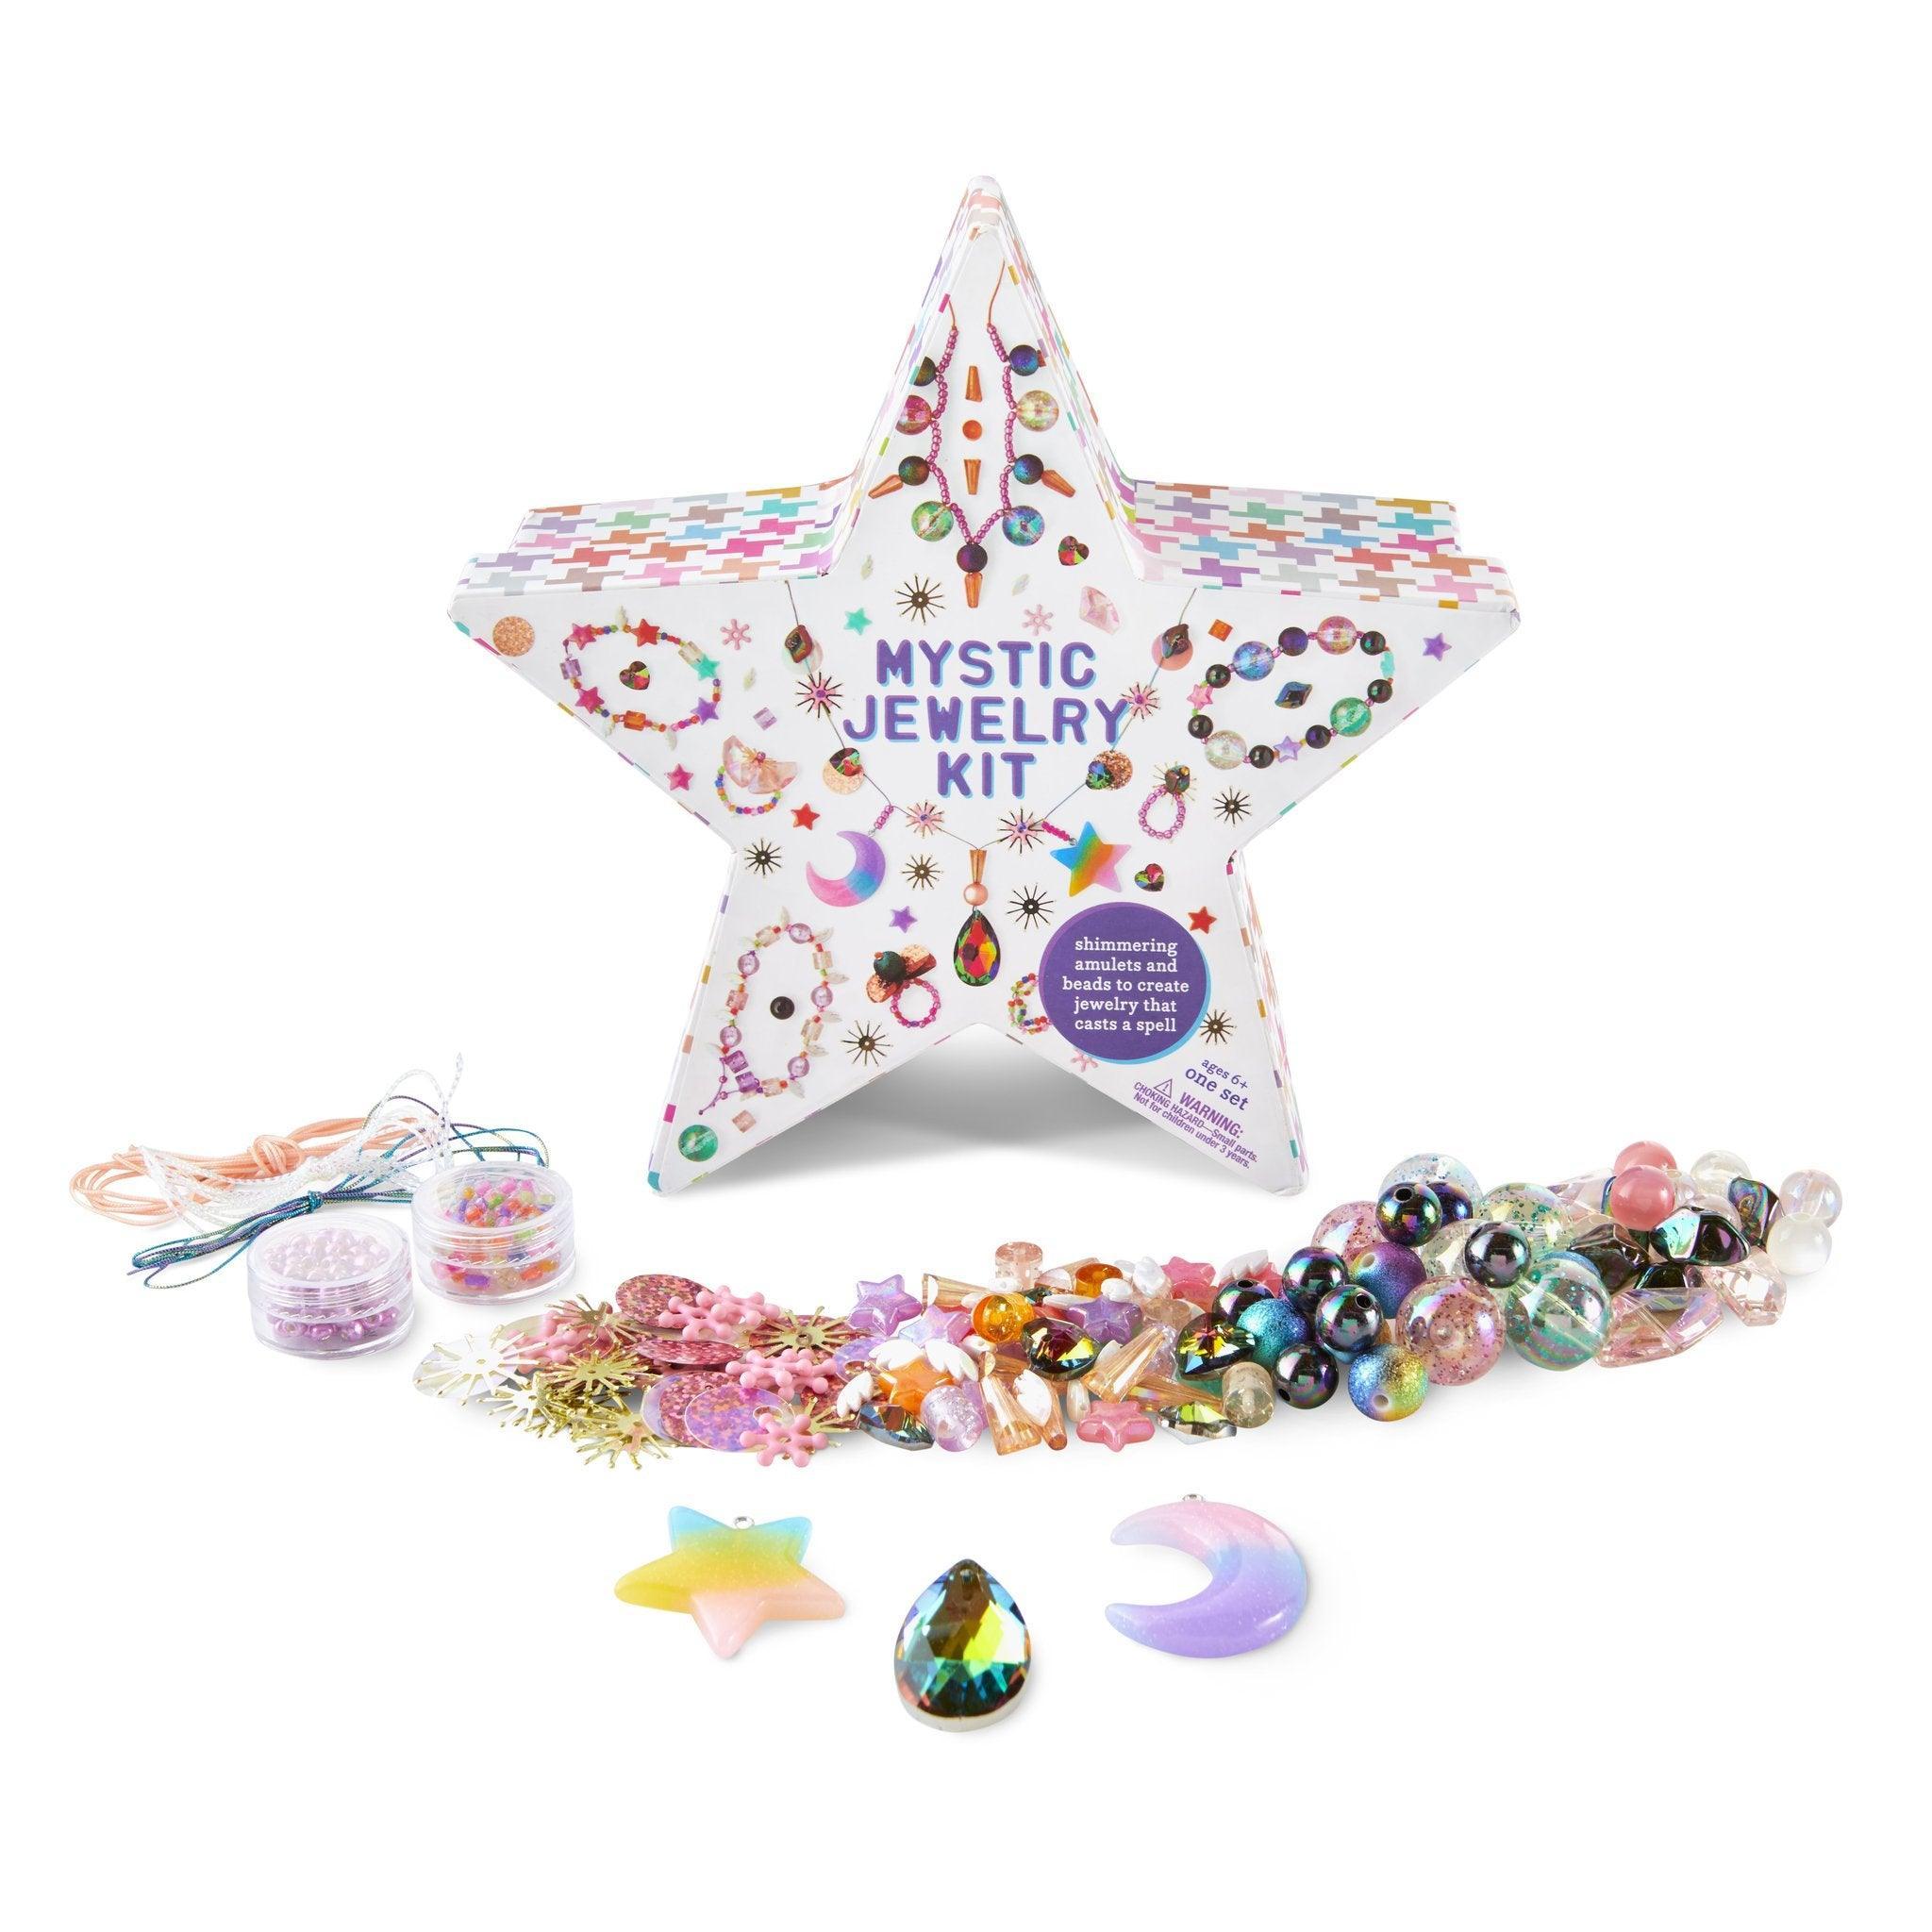 Mystic Jewelry Kit - Why and Whale